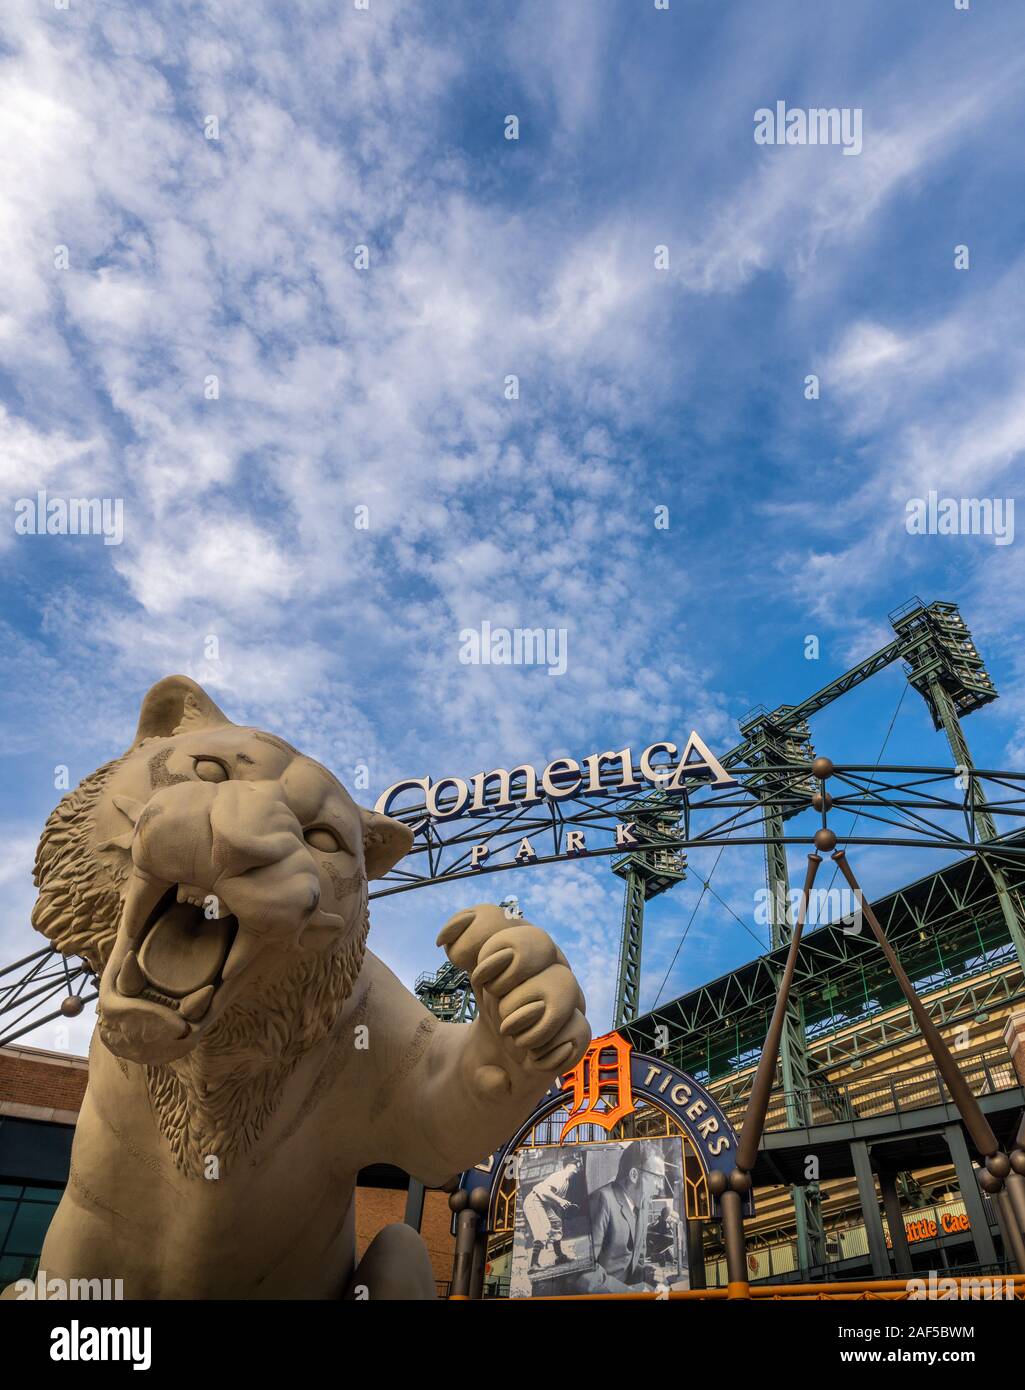 Detroit, MI - Oct 6 2019: Comerica Park is the home of Detroit Tigers baseball team. Vertical close up of the main entrance signage and the tiger at t Stock Photo